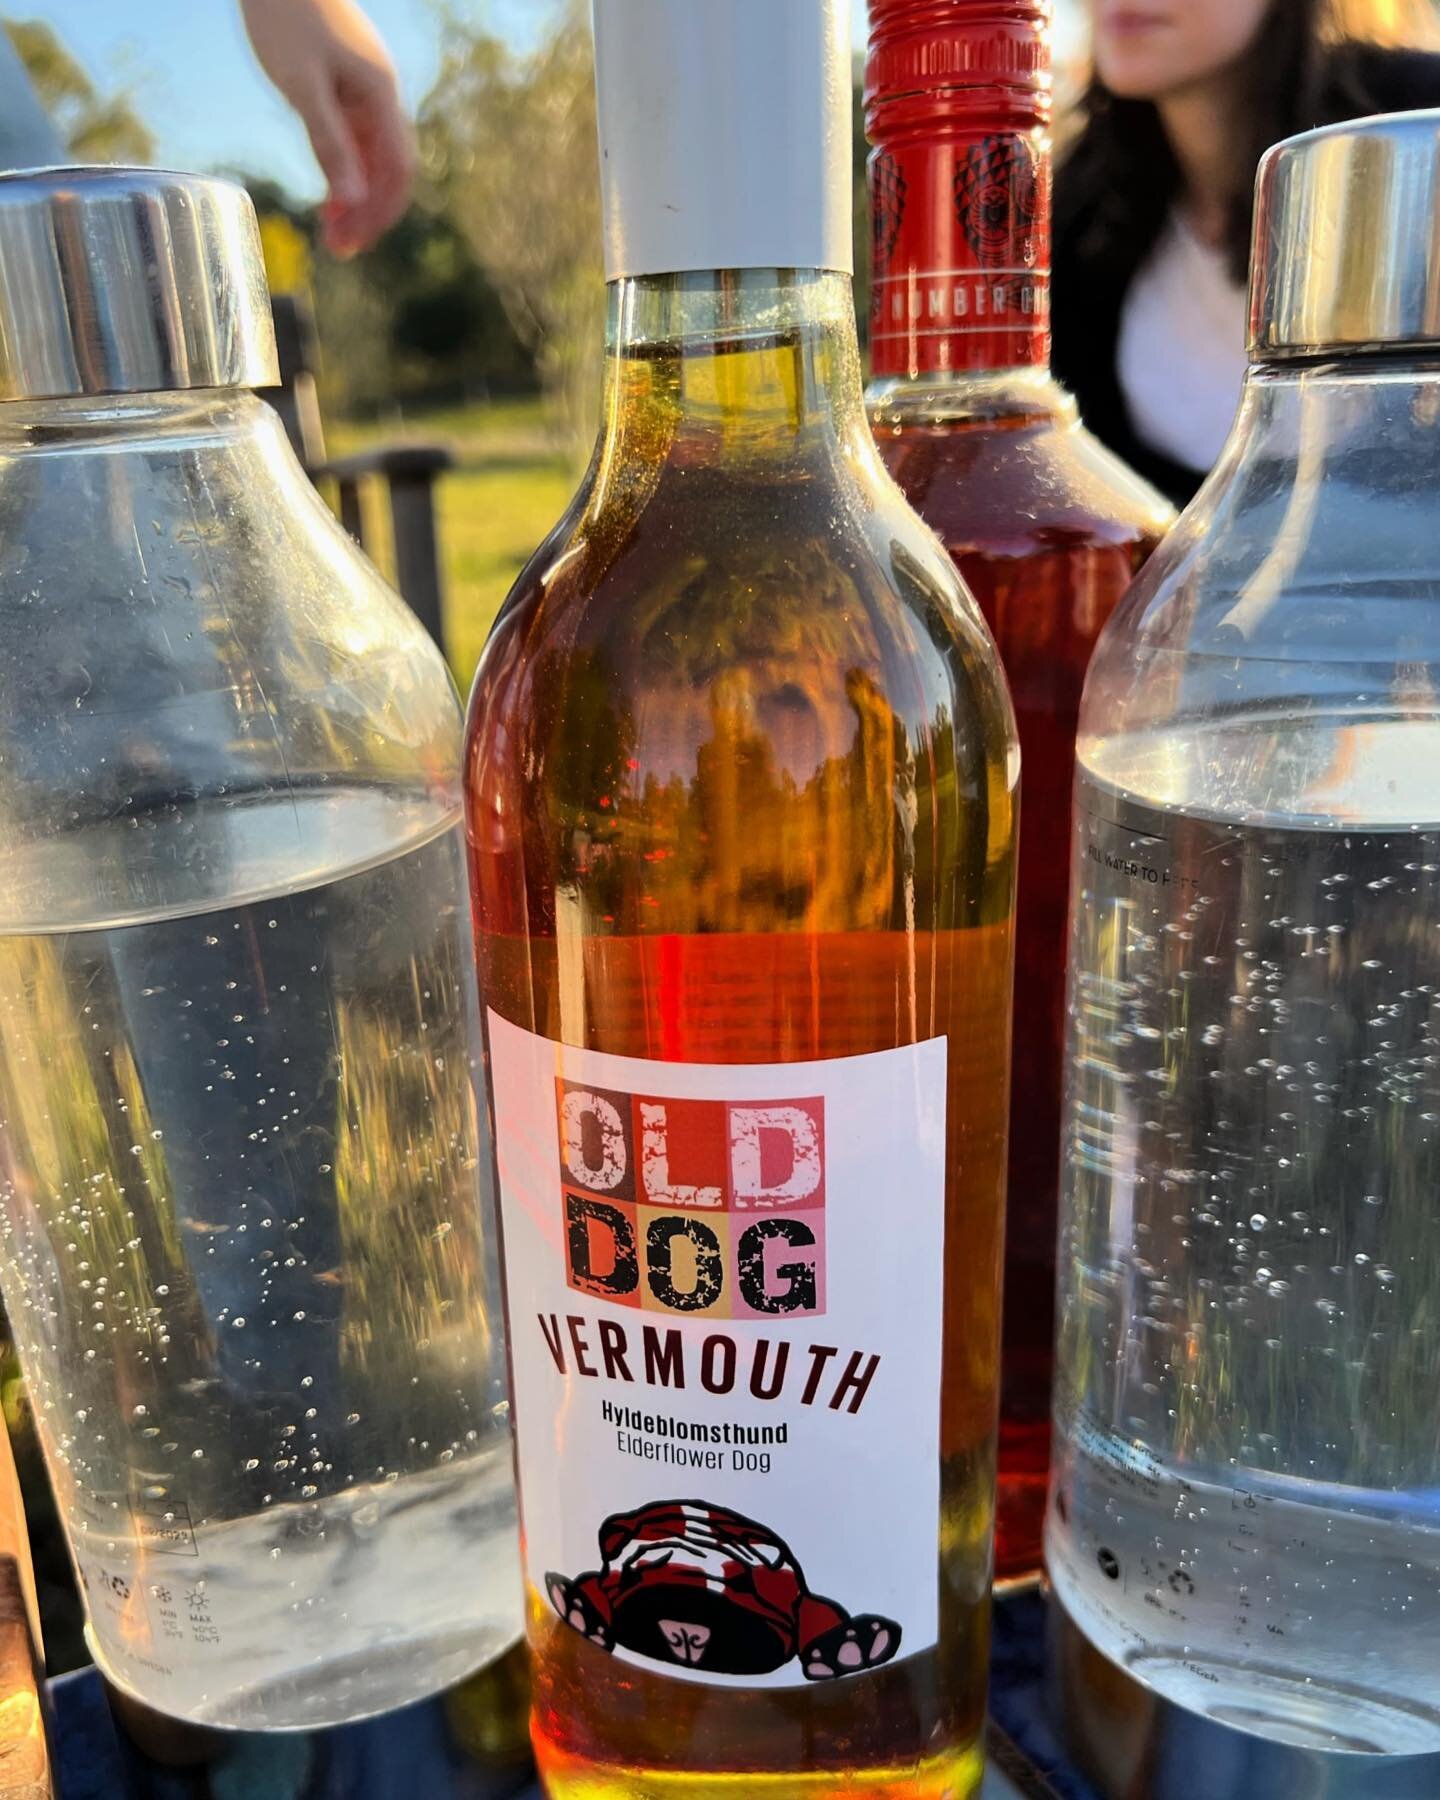 💦🫧 + 🥃 = 🤌🏽 

An extra refreshing aperitif! The soda water lightens up the @olddog.vermouth making it an easy &lsquo;cocktail&rsquo; like drink for the next sunset 🌅 

#refreshing #light #cocktail #vermut #aperif #freshisbest #sundowner #vermou